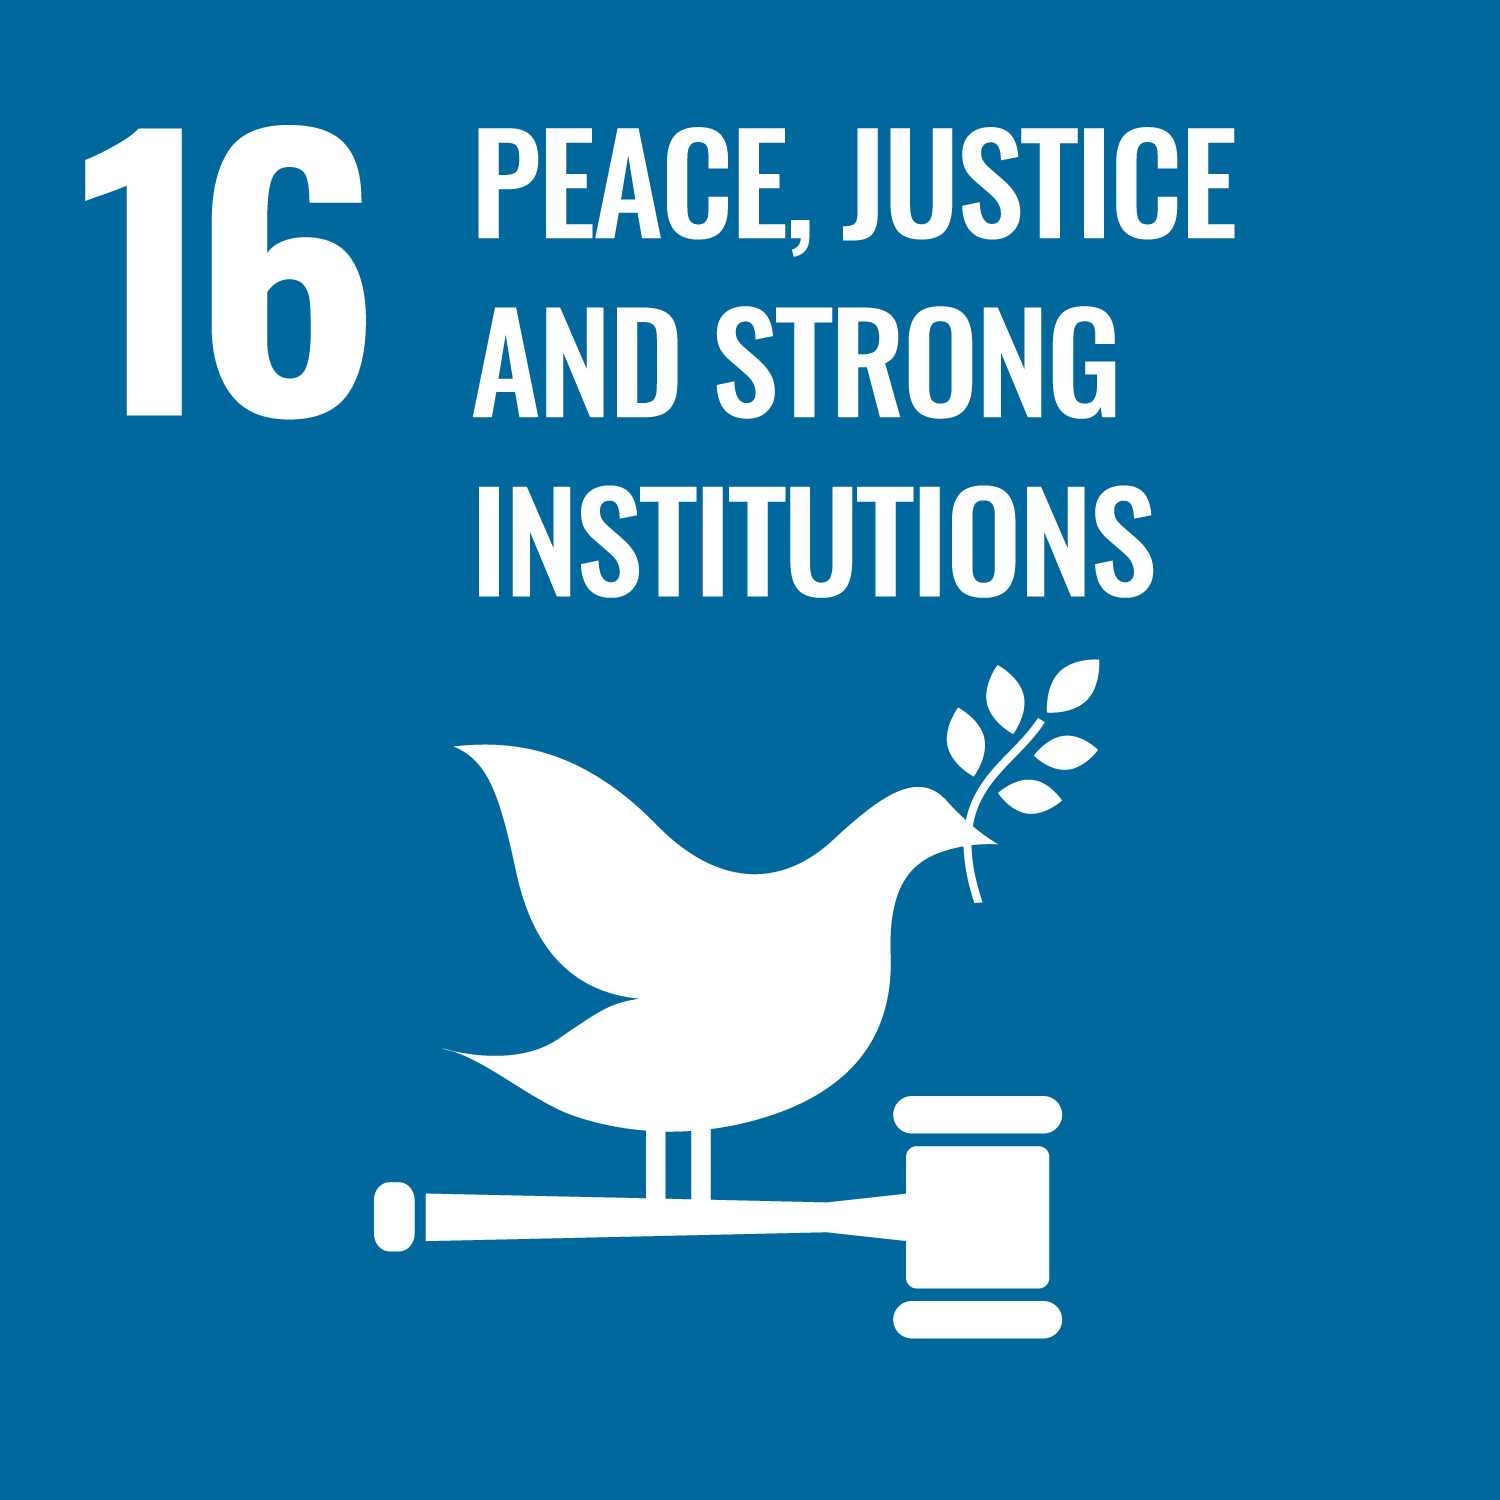 Goal 16 Peace, Justice and Strong Institutions